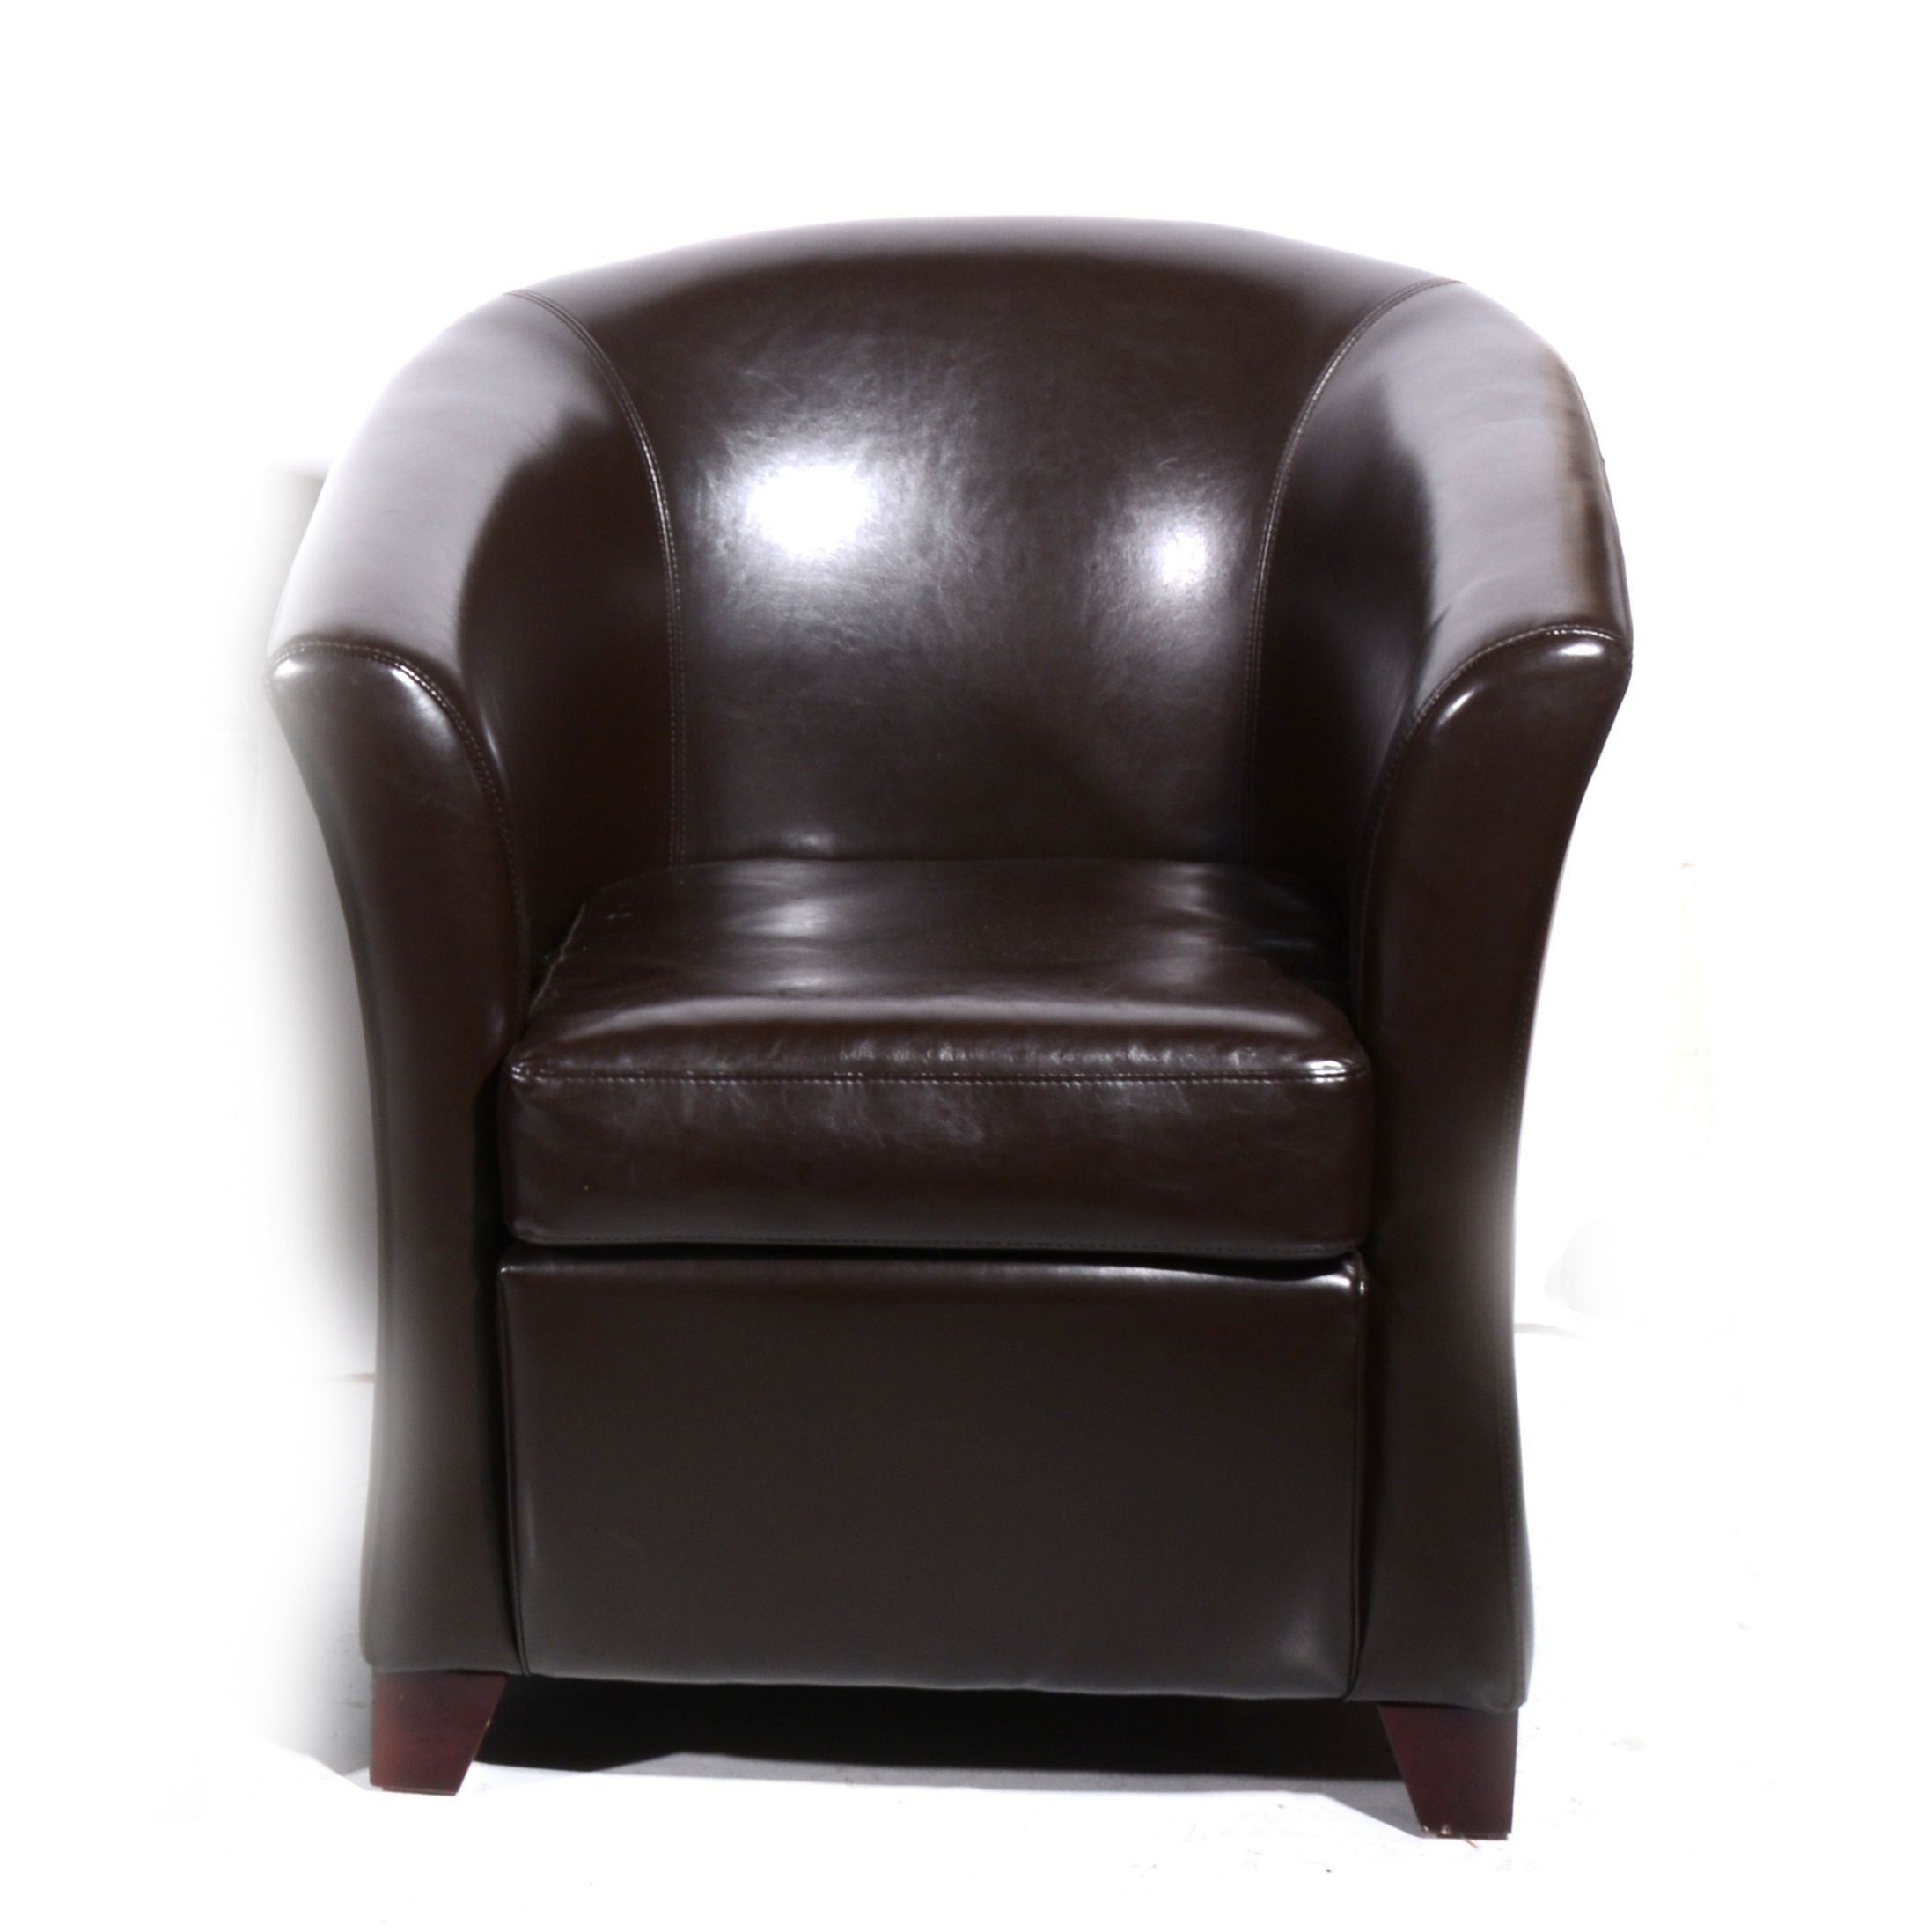 A contemporary brown leather tub chair